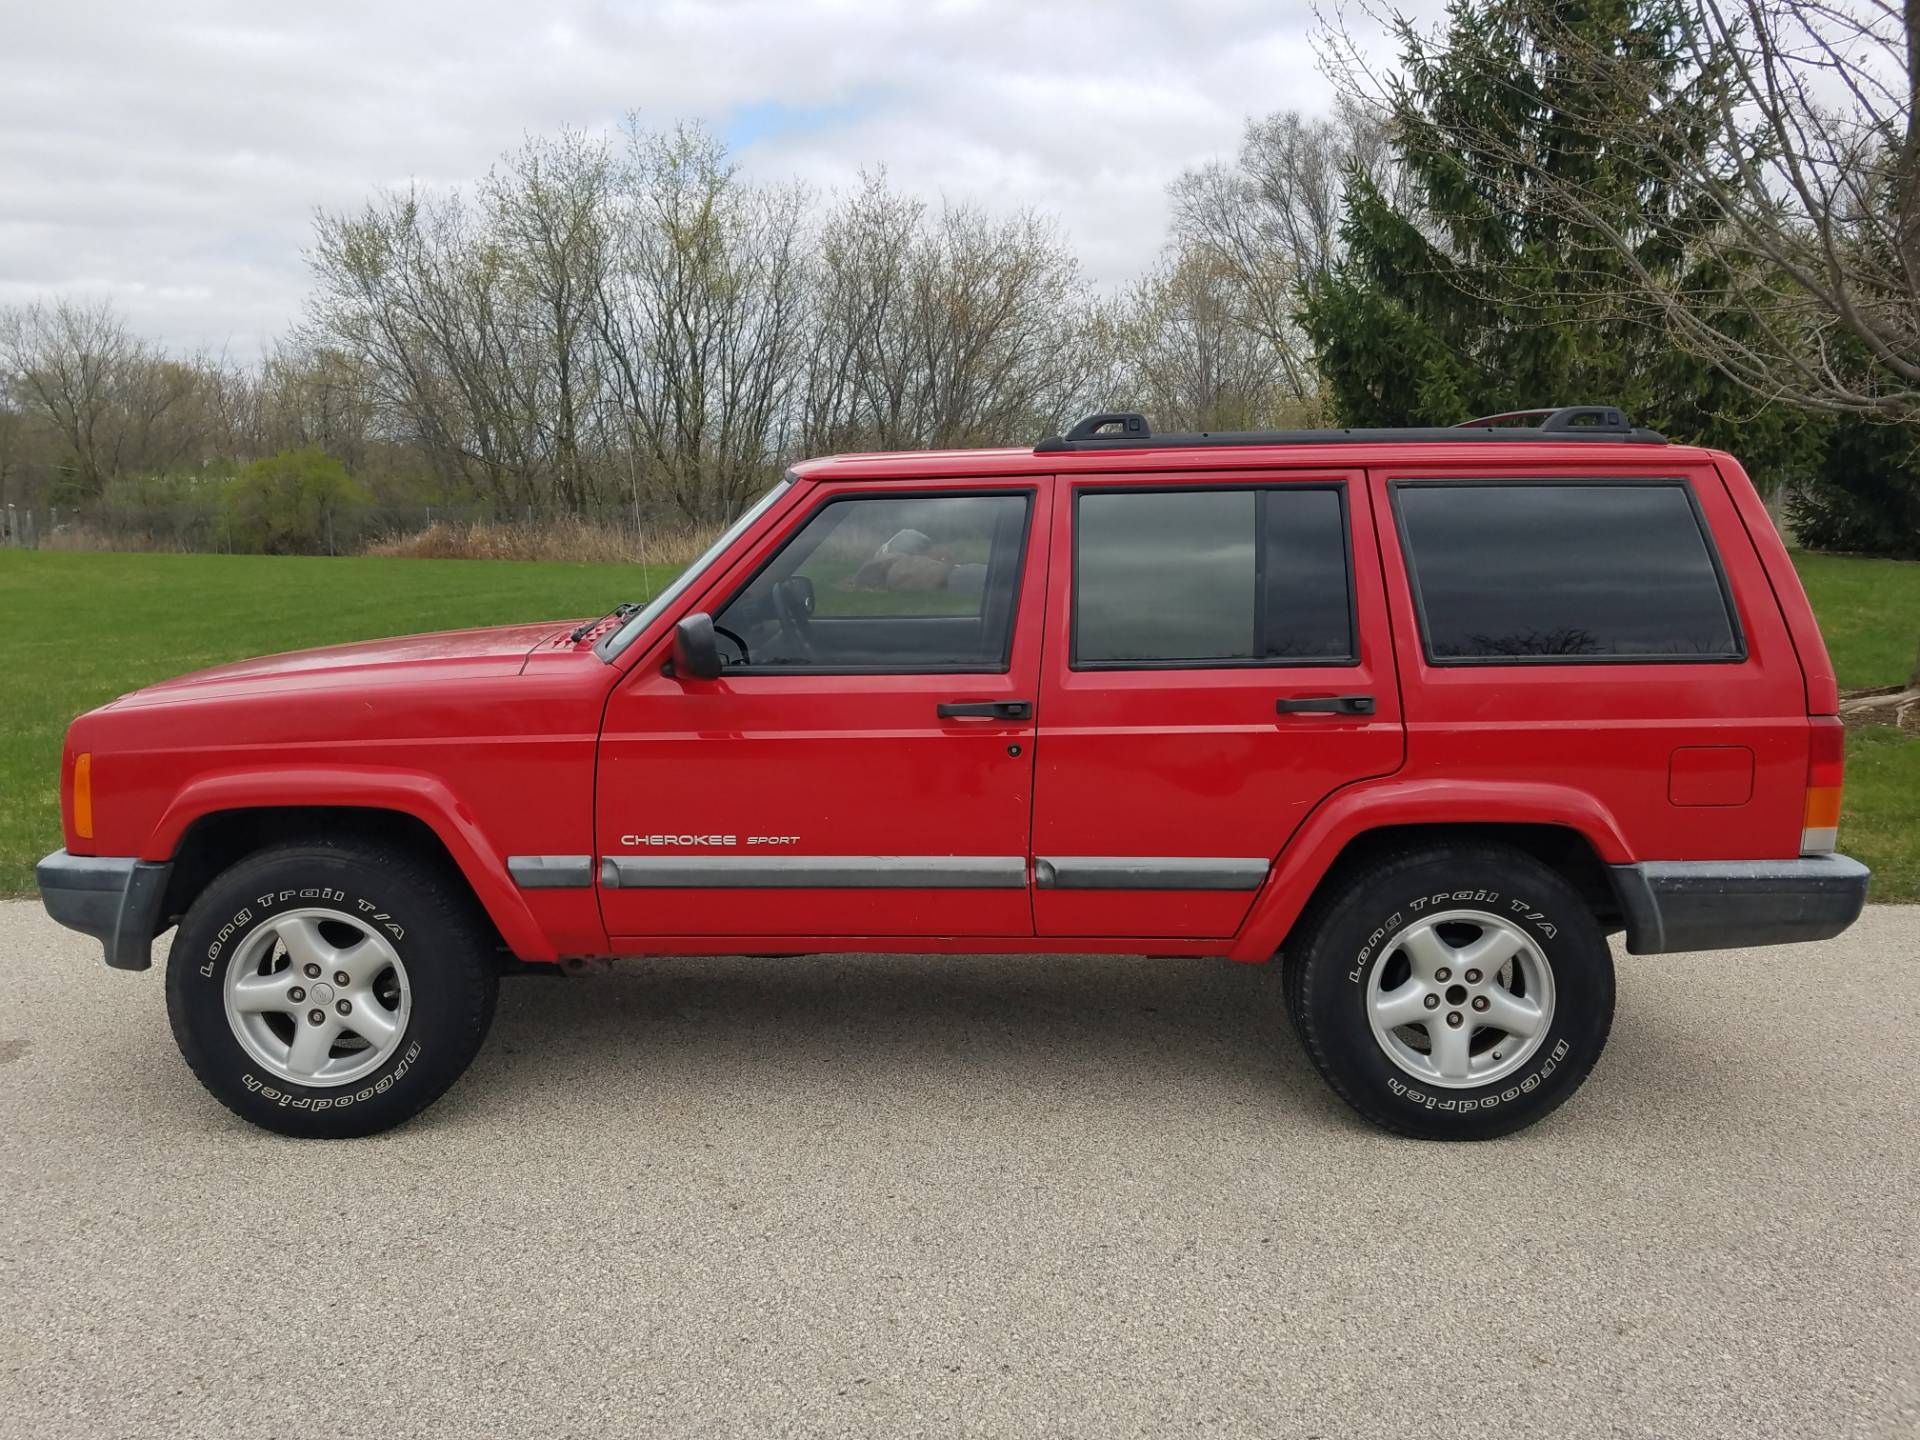 Used 2001 Jeep® Cherokee Sport | Automobile in Big Bend WI | 4387 Flame Red